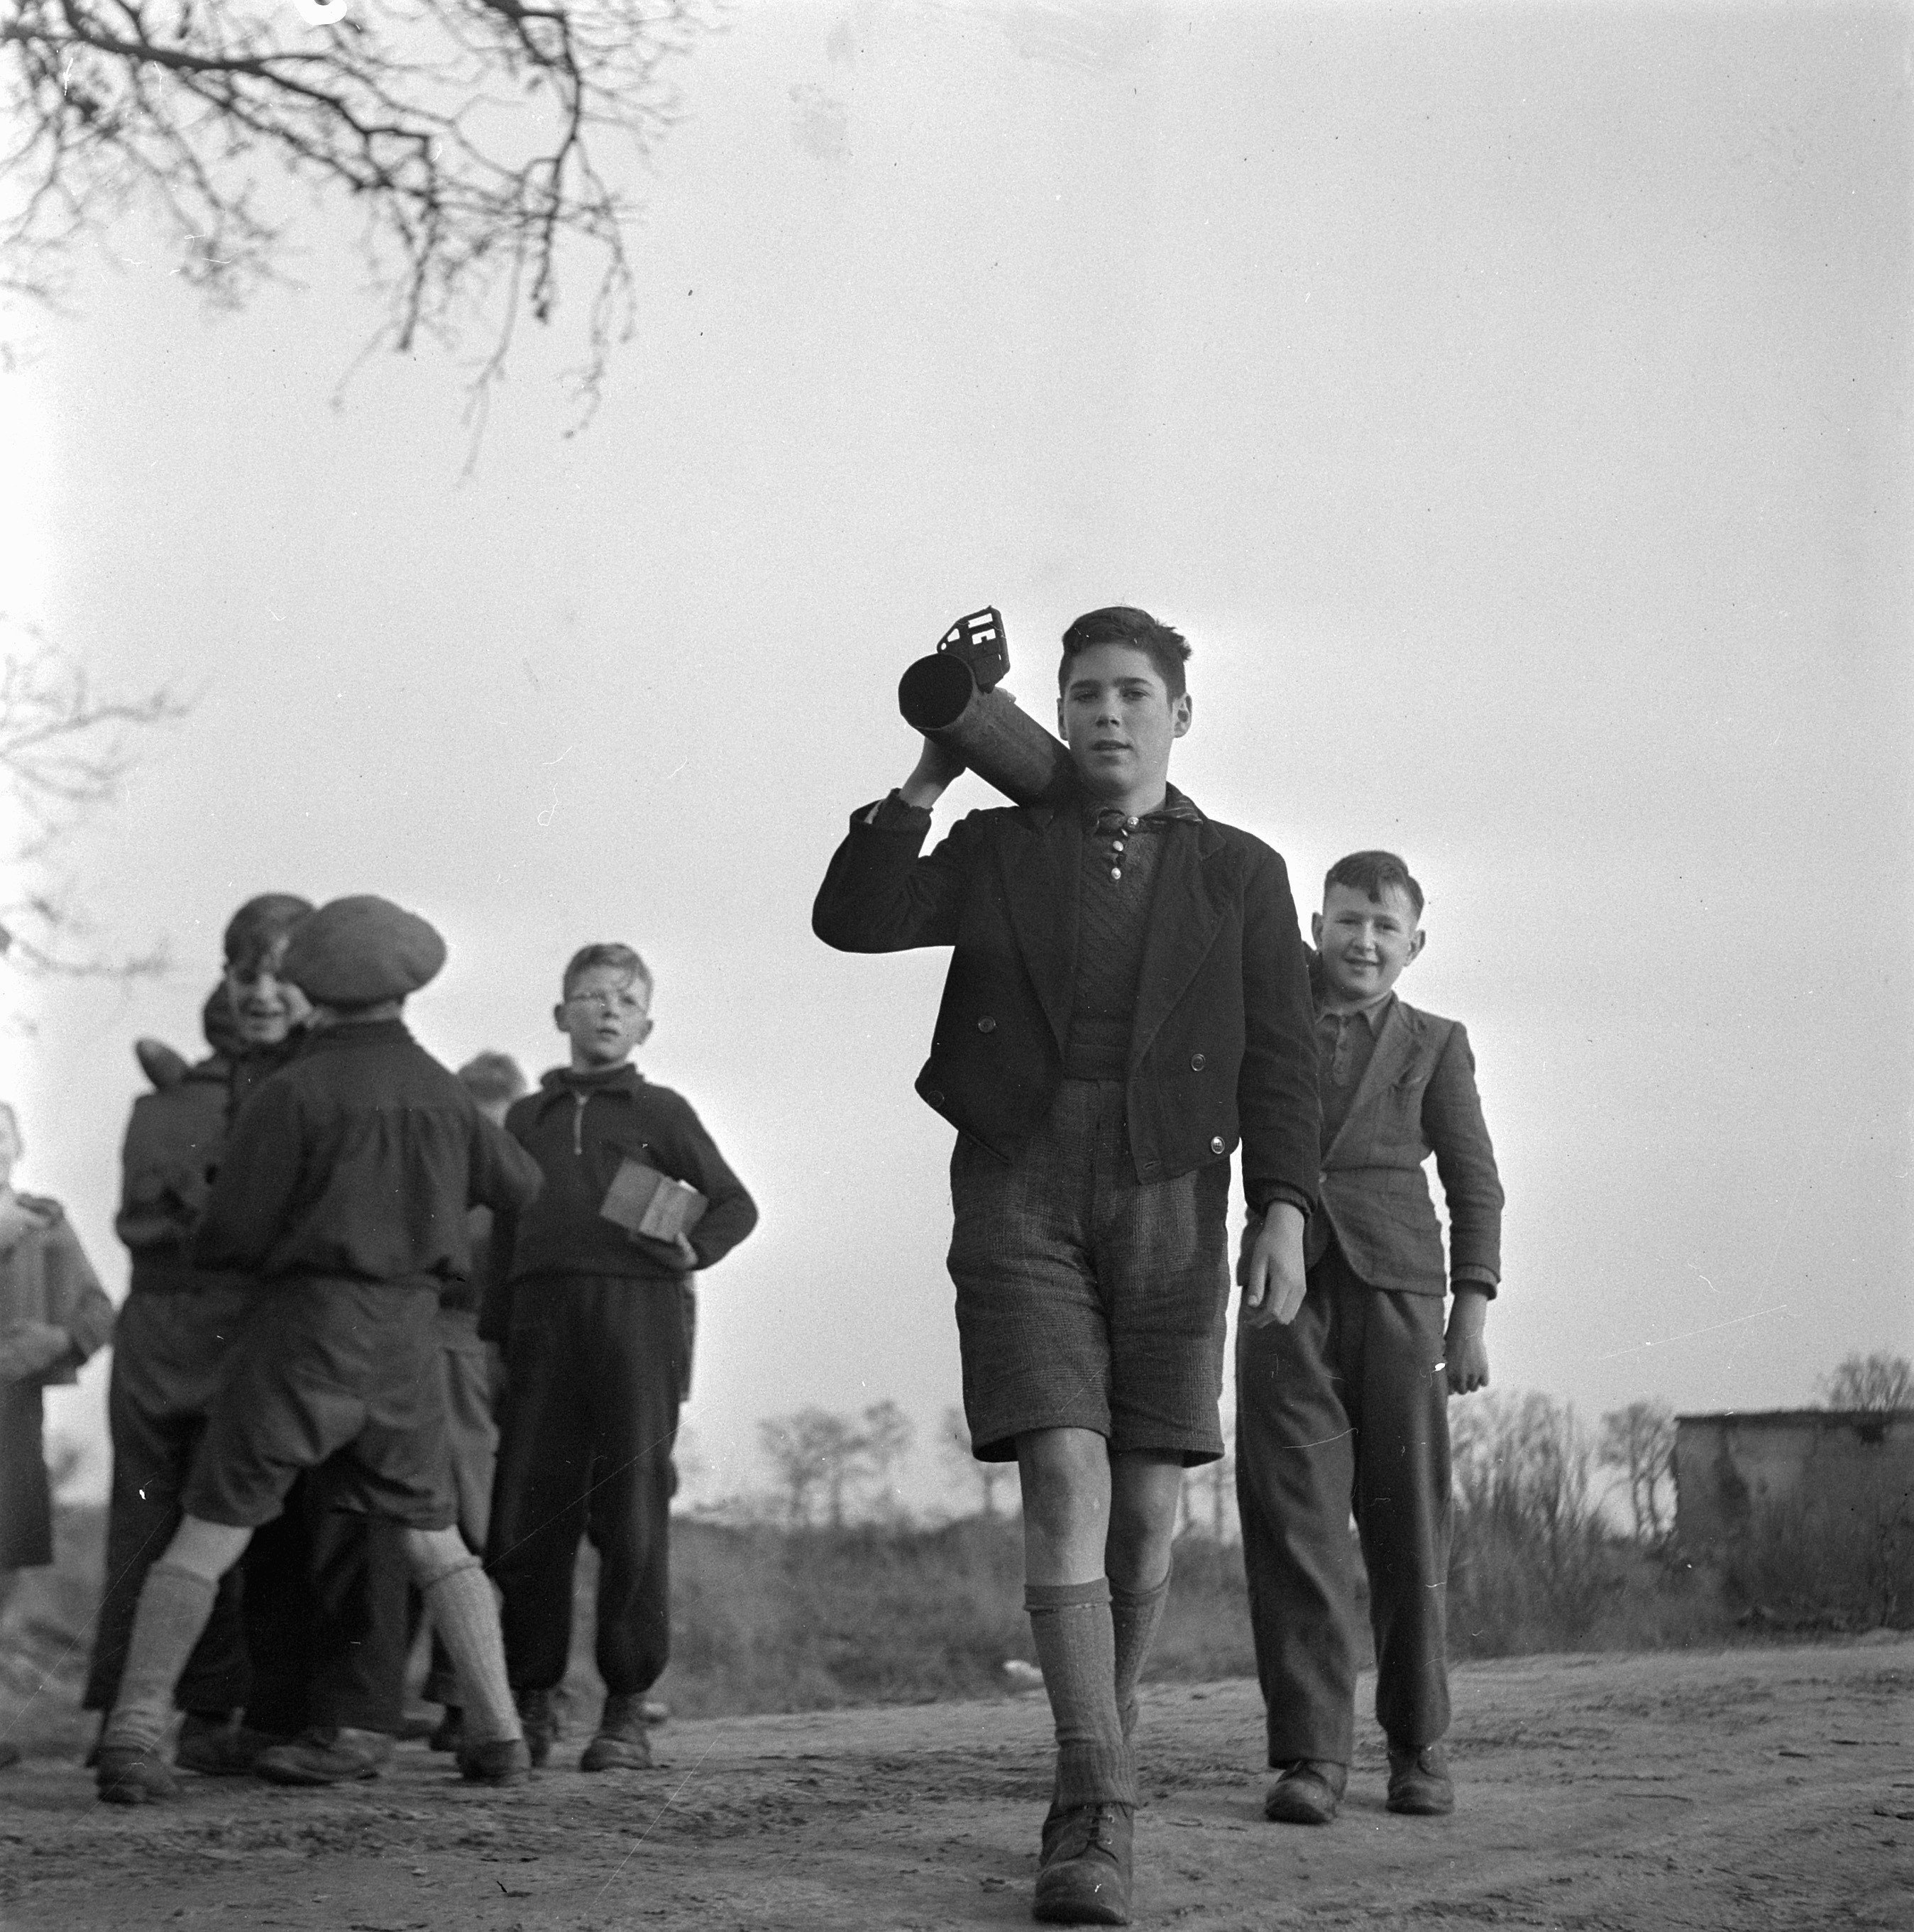 Children playing with a Panzerschreck launcher left behind by German troops, southern Netherlands, 24 Dec 1945